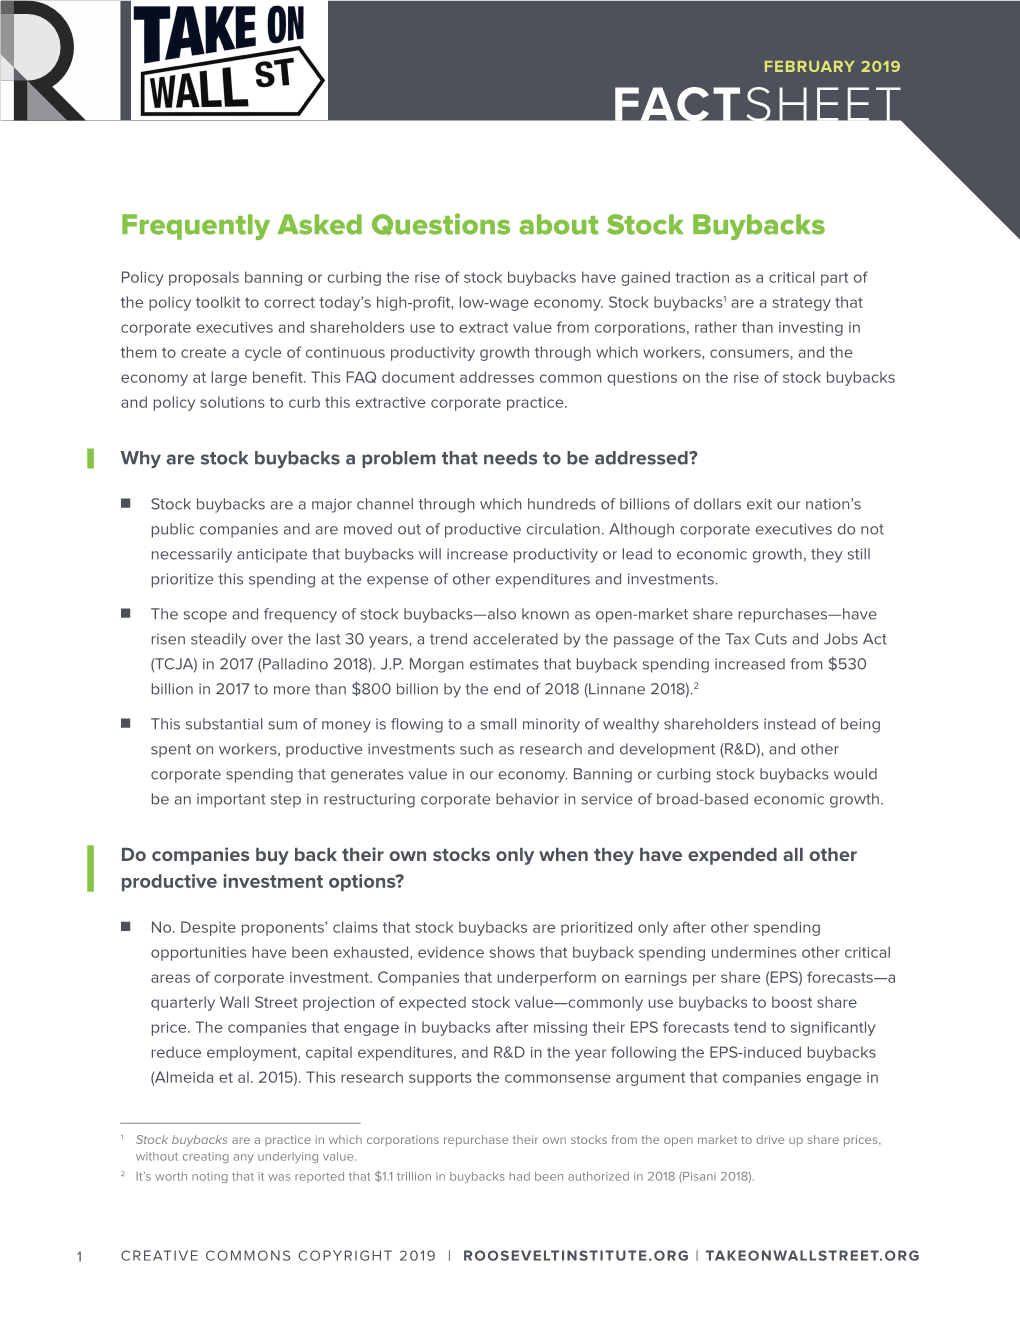 Frequently Asked Questions About Stock Buybacks